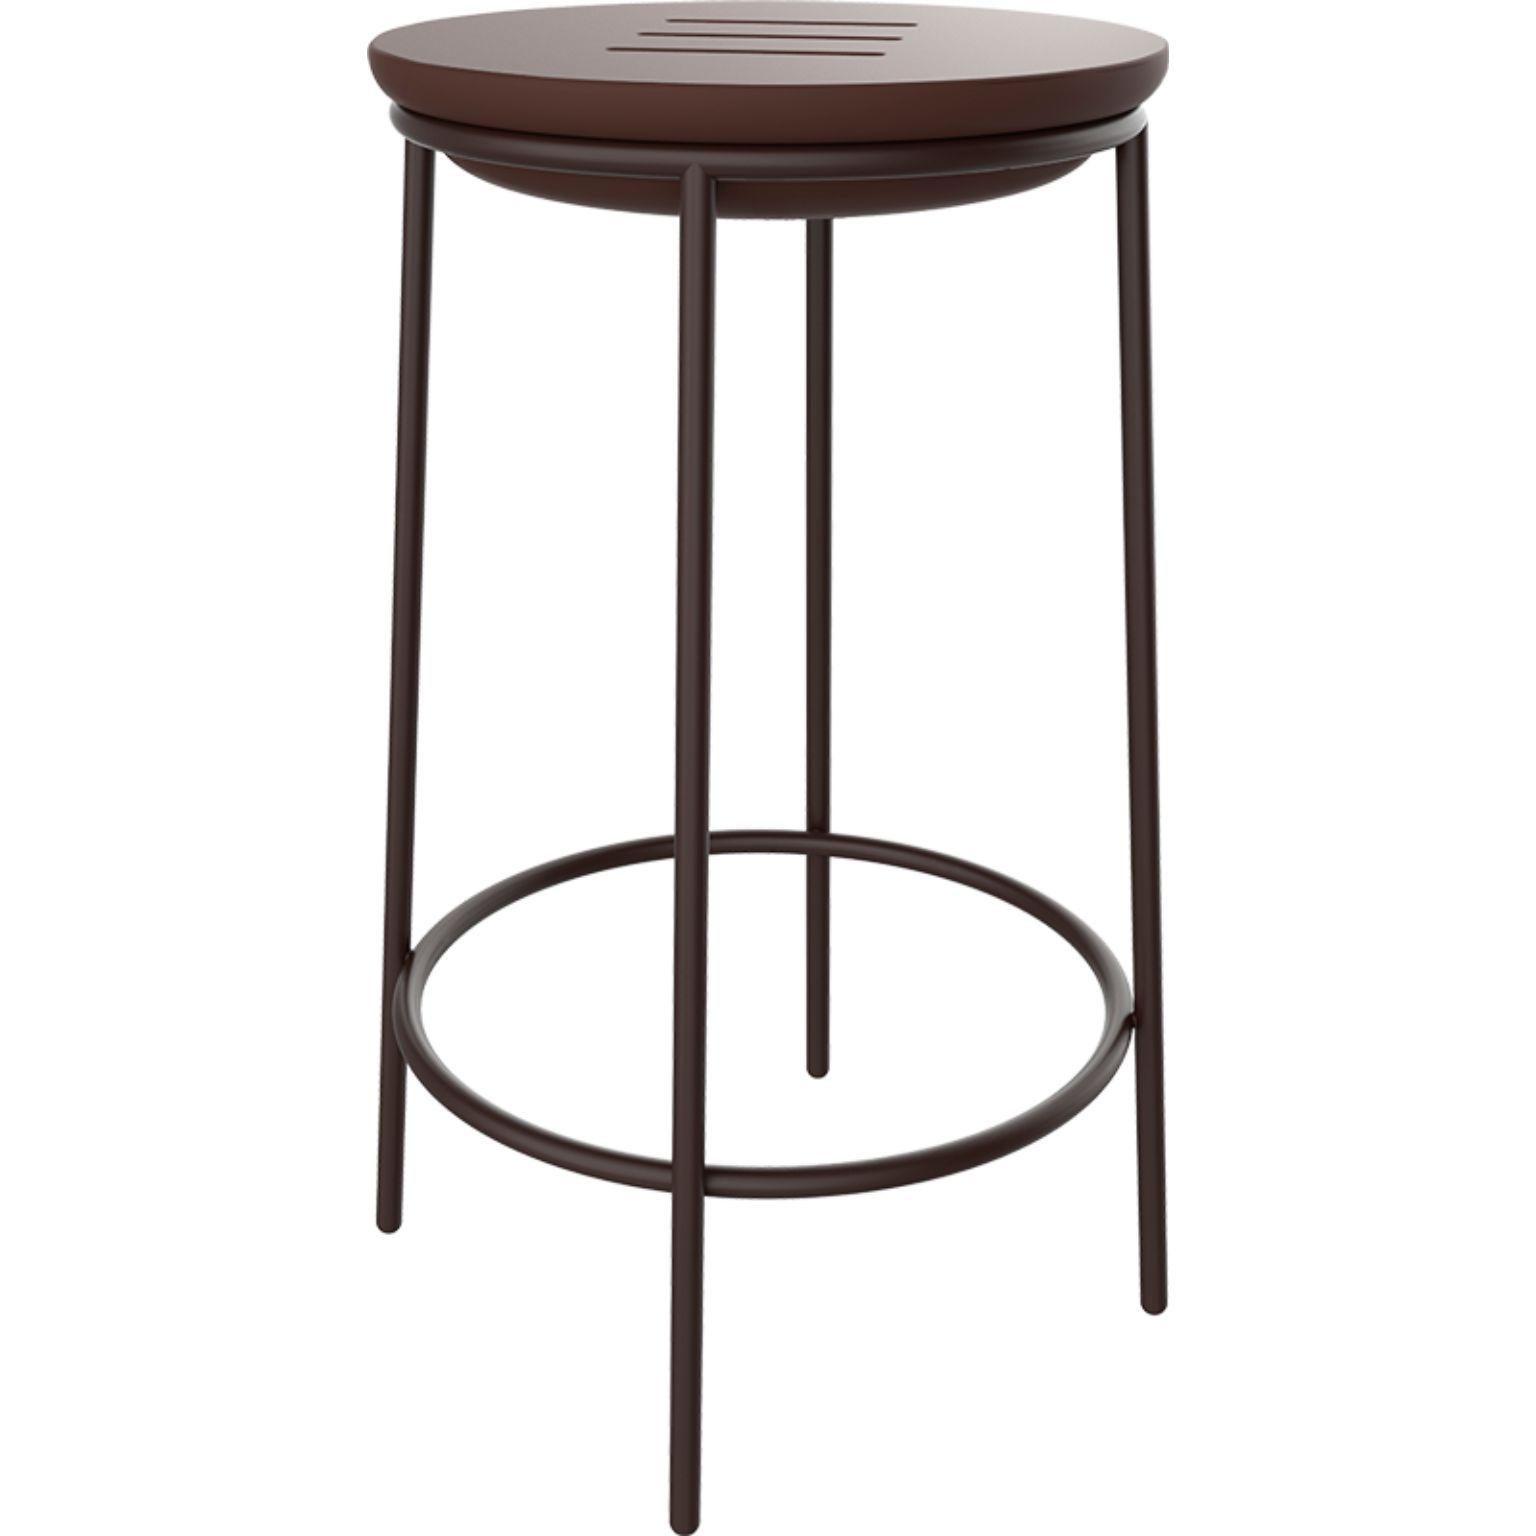 Lace Chocolate 60 High table by MOWEE
Dimensions: D75 x H111 cm
Material: Polyethylene and stainless steel
Weight: 10.5 kg
Also available in different colors and finishes. 

Lace is a collection of furniture made by rotomoulding. Its shape